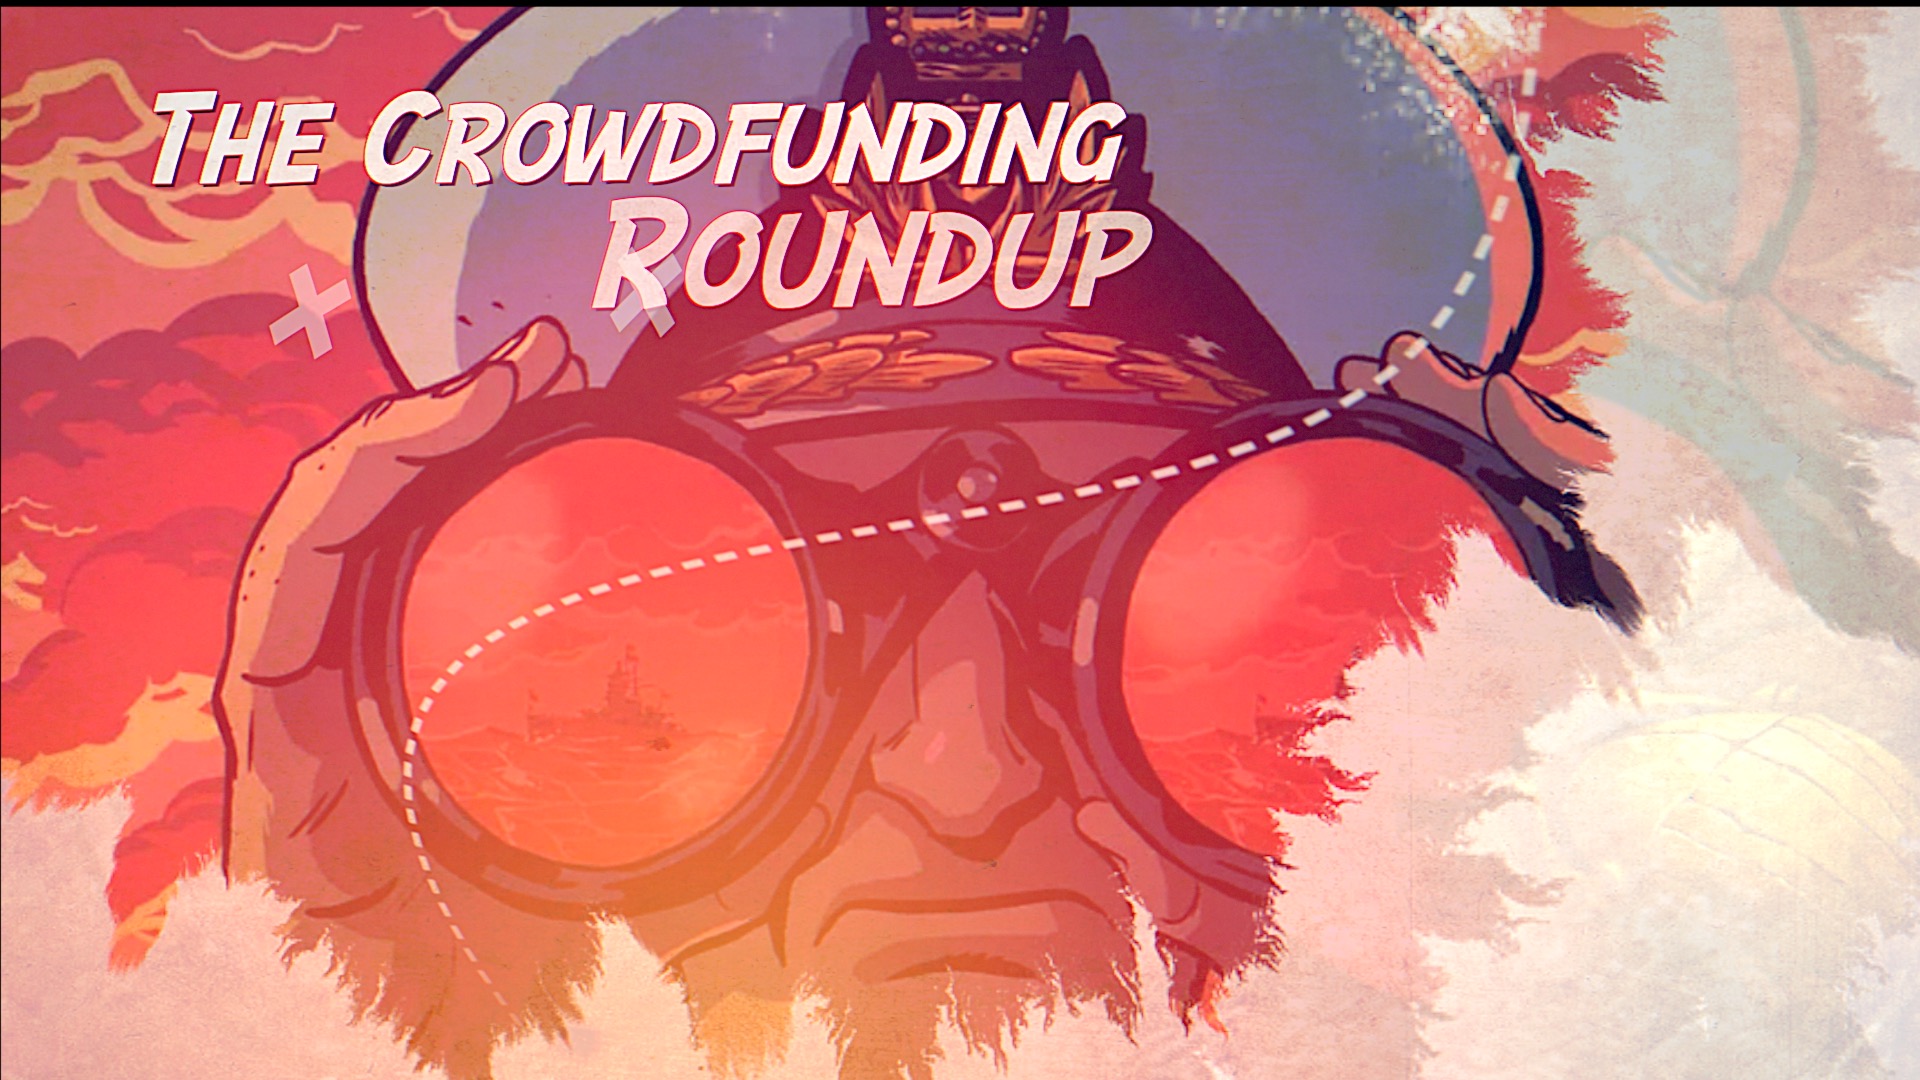 The Crowdfunding Roundup for Wednesday – Thursday, March 15th – 16th